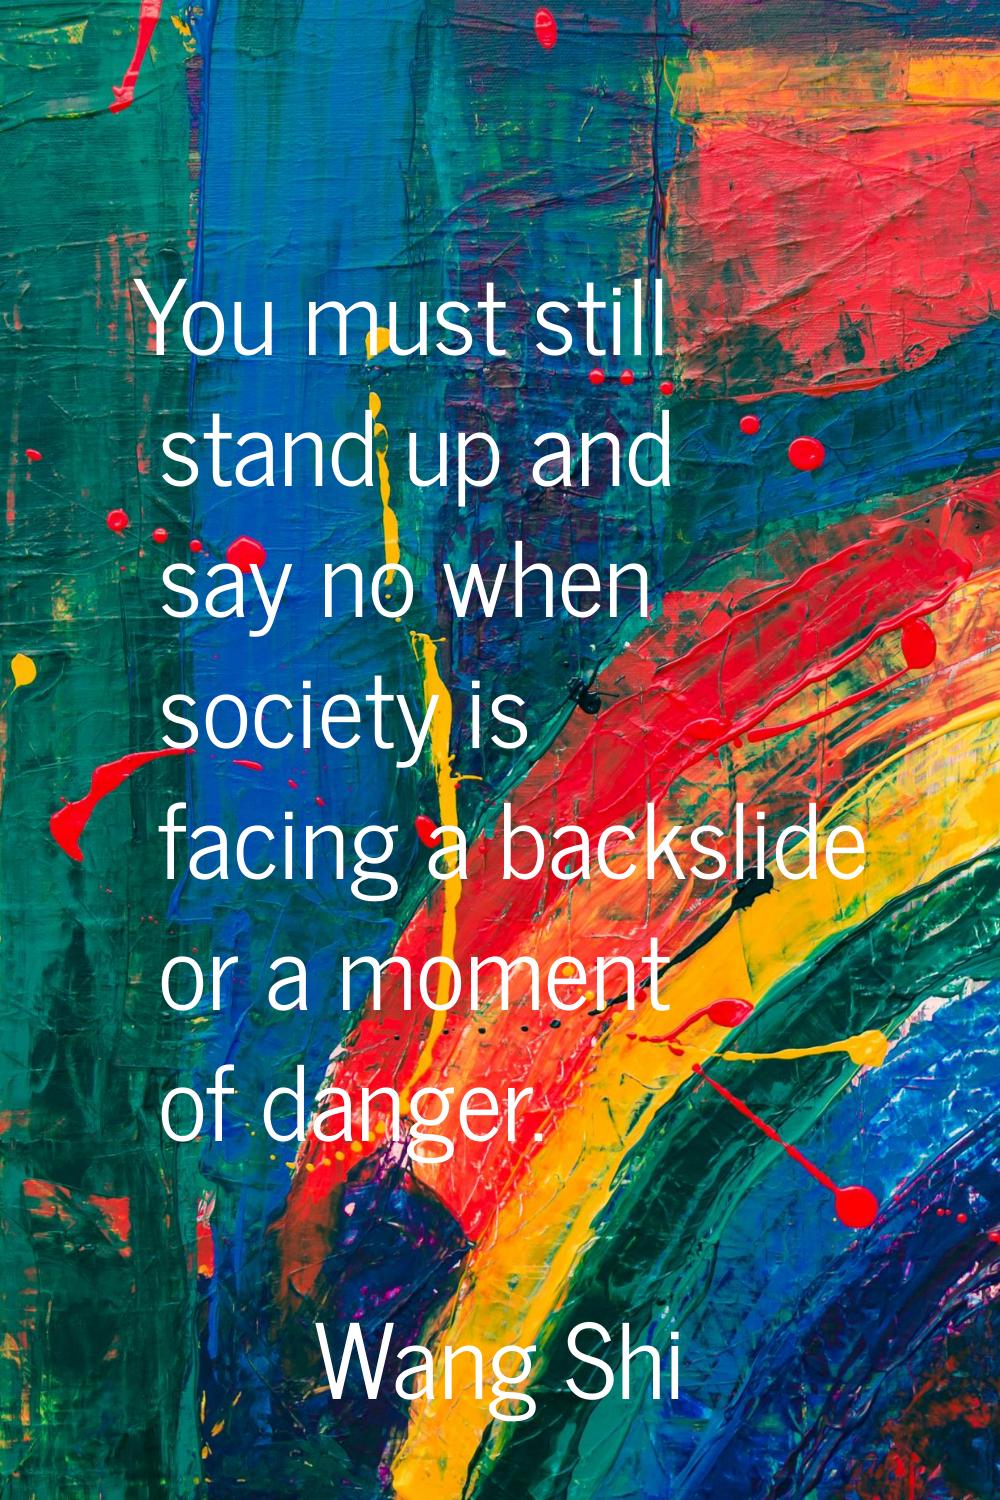 You must still stand up and say no when society is facing a backslide or a moment of danger.